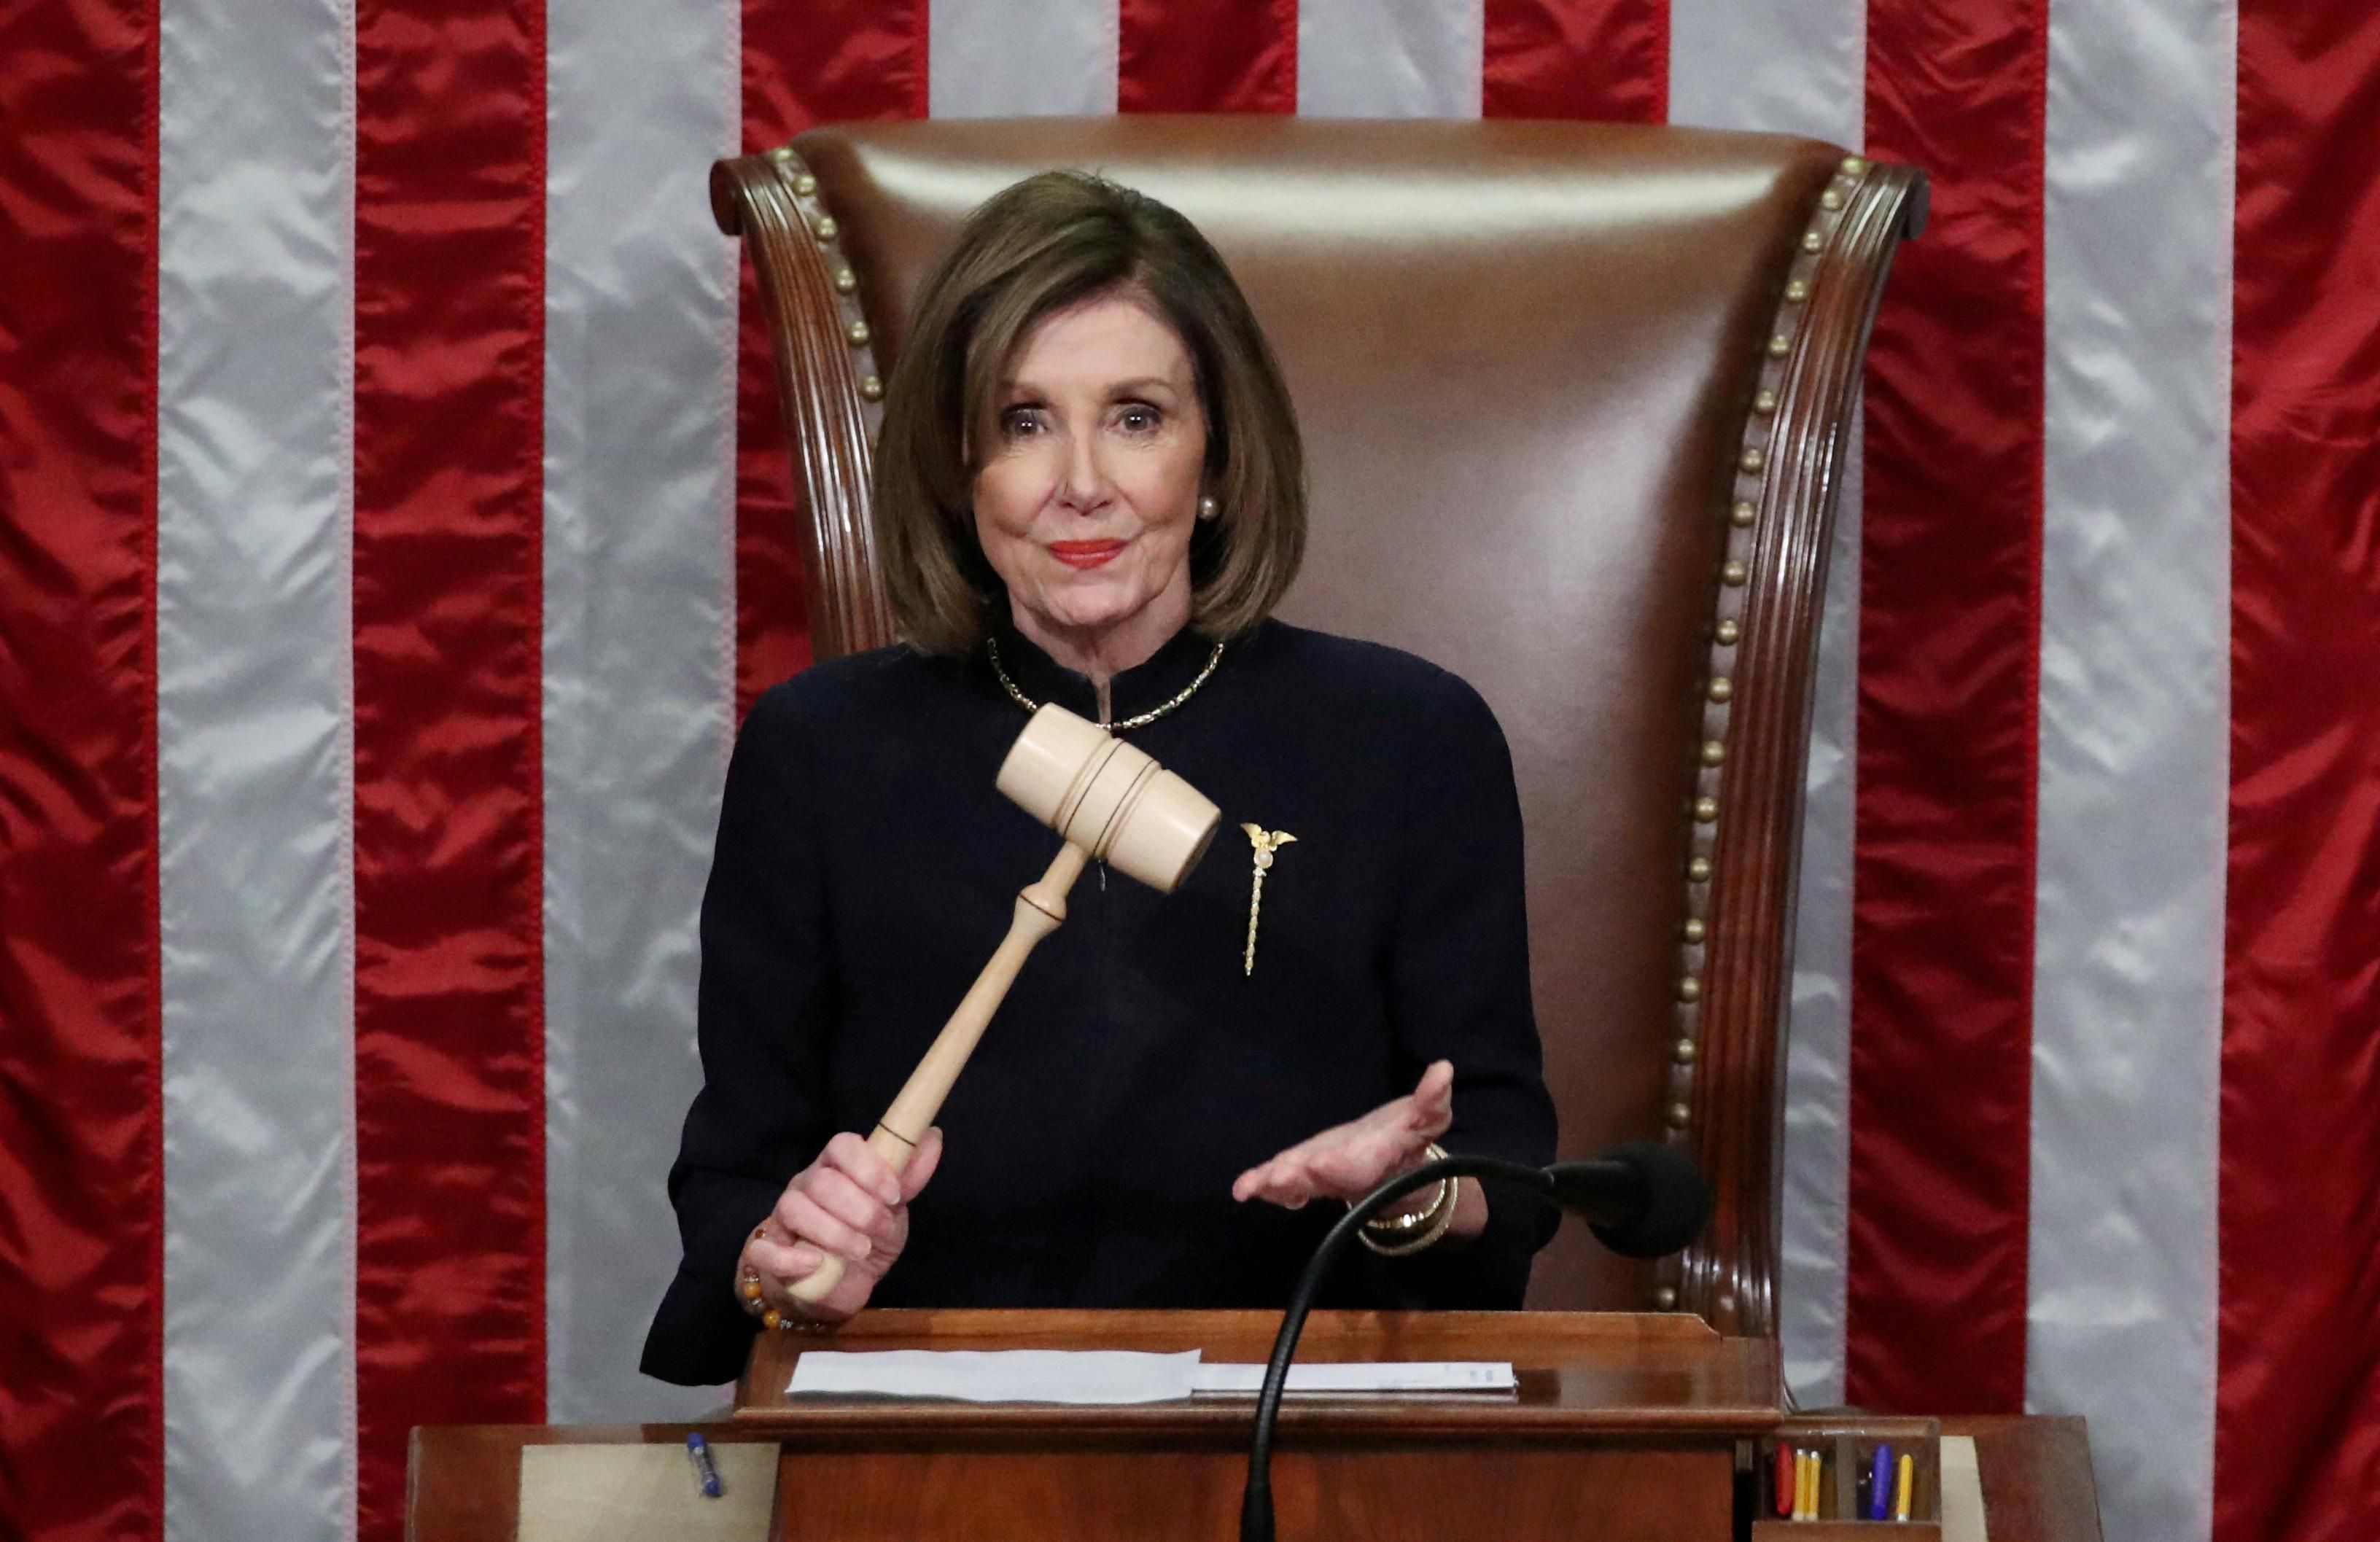 US House Speaker Nancy Pelosi (D-CA) wields the gavel as she presides over the first impeachment of President Donald Trump.